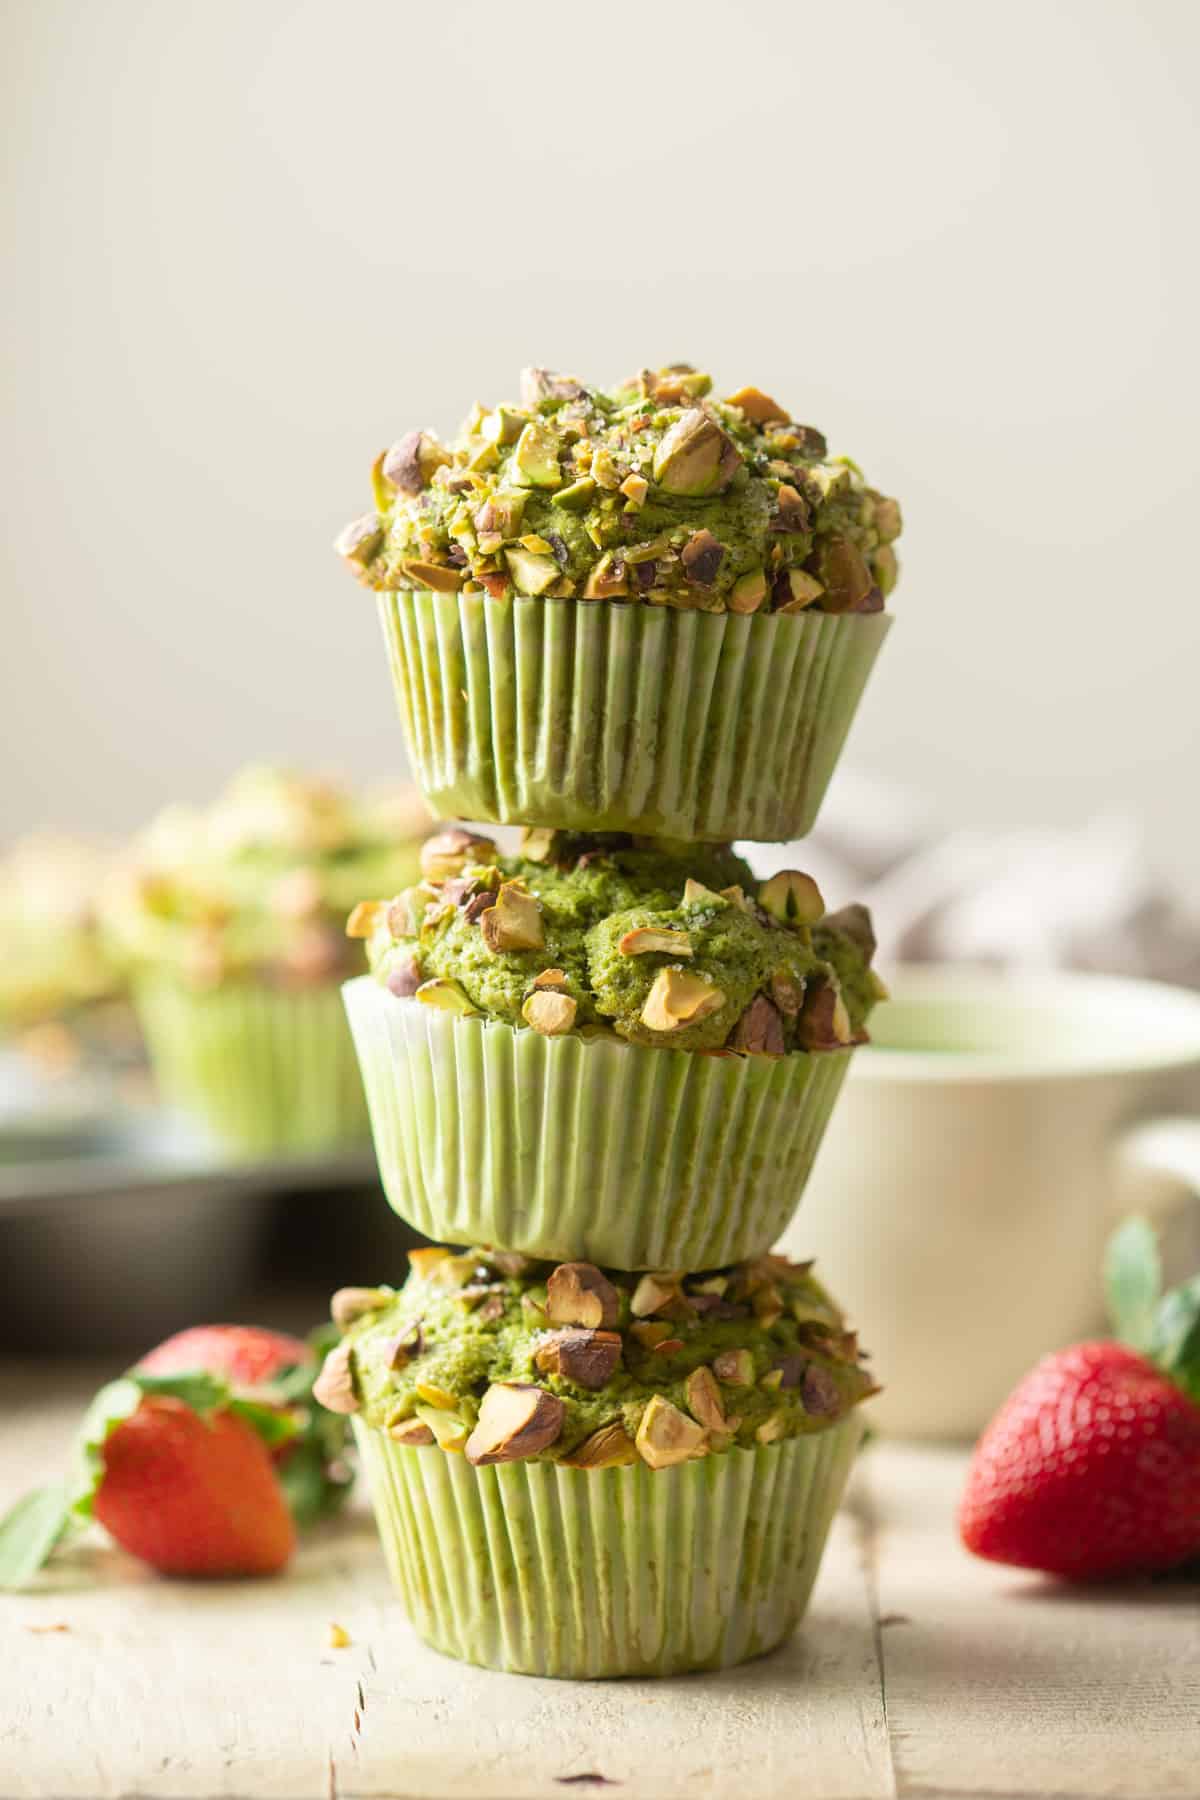 Stack of 3 Matcha Pistachio Muffins with strawberries and tea cup in the background.